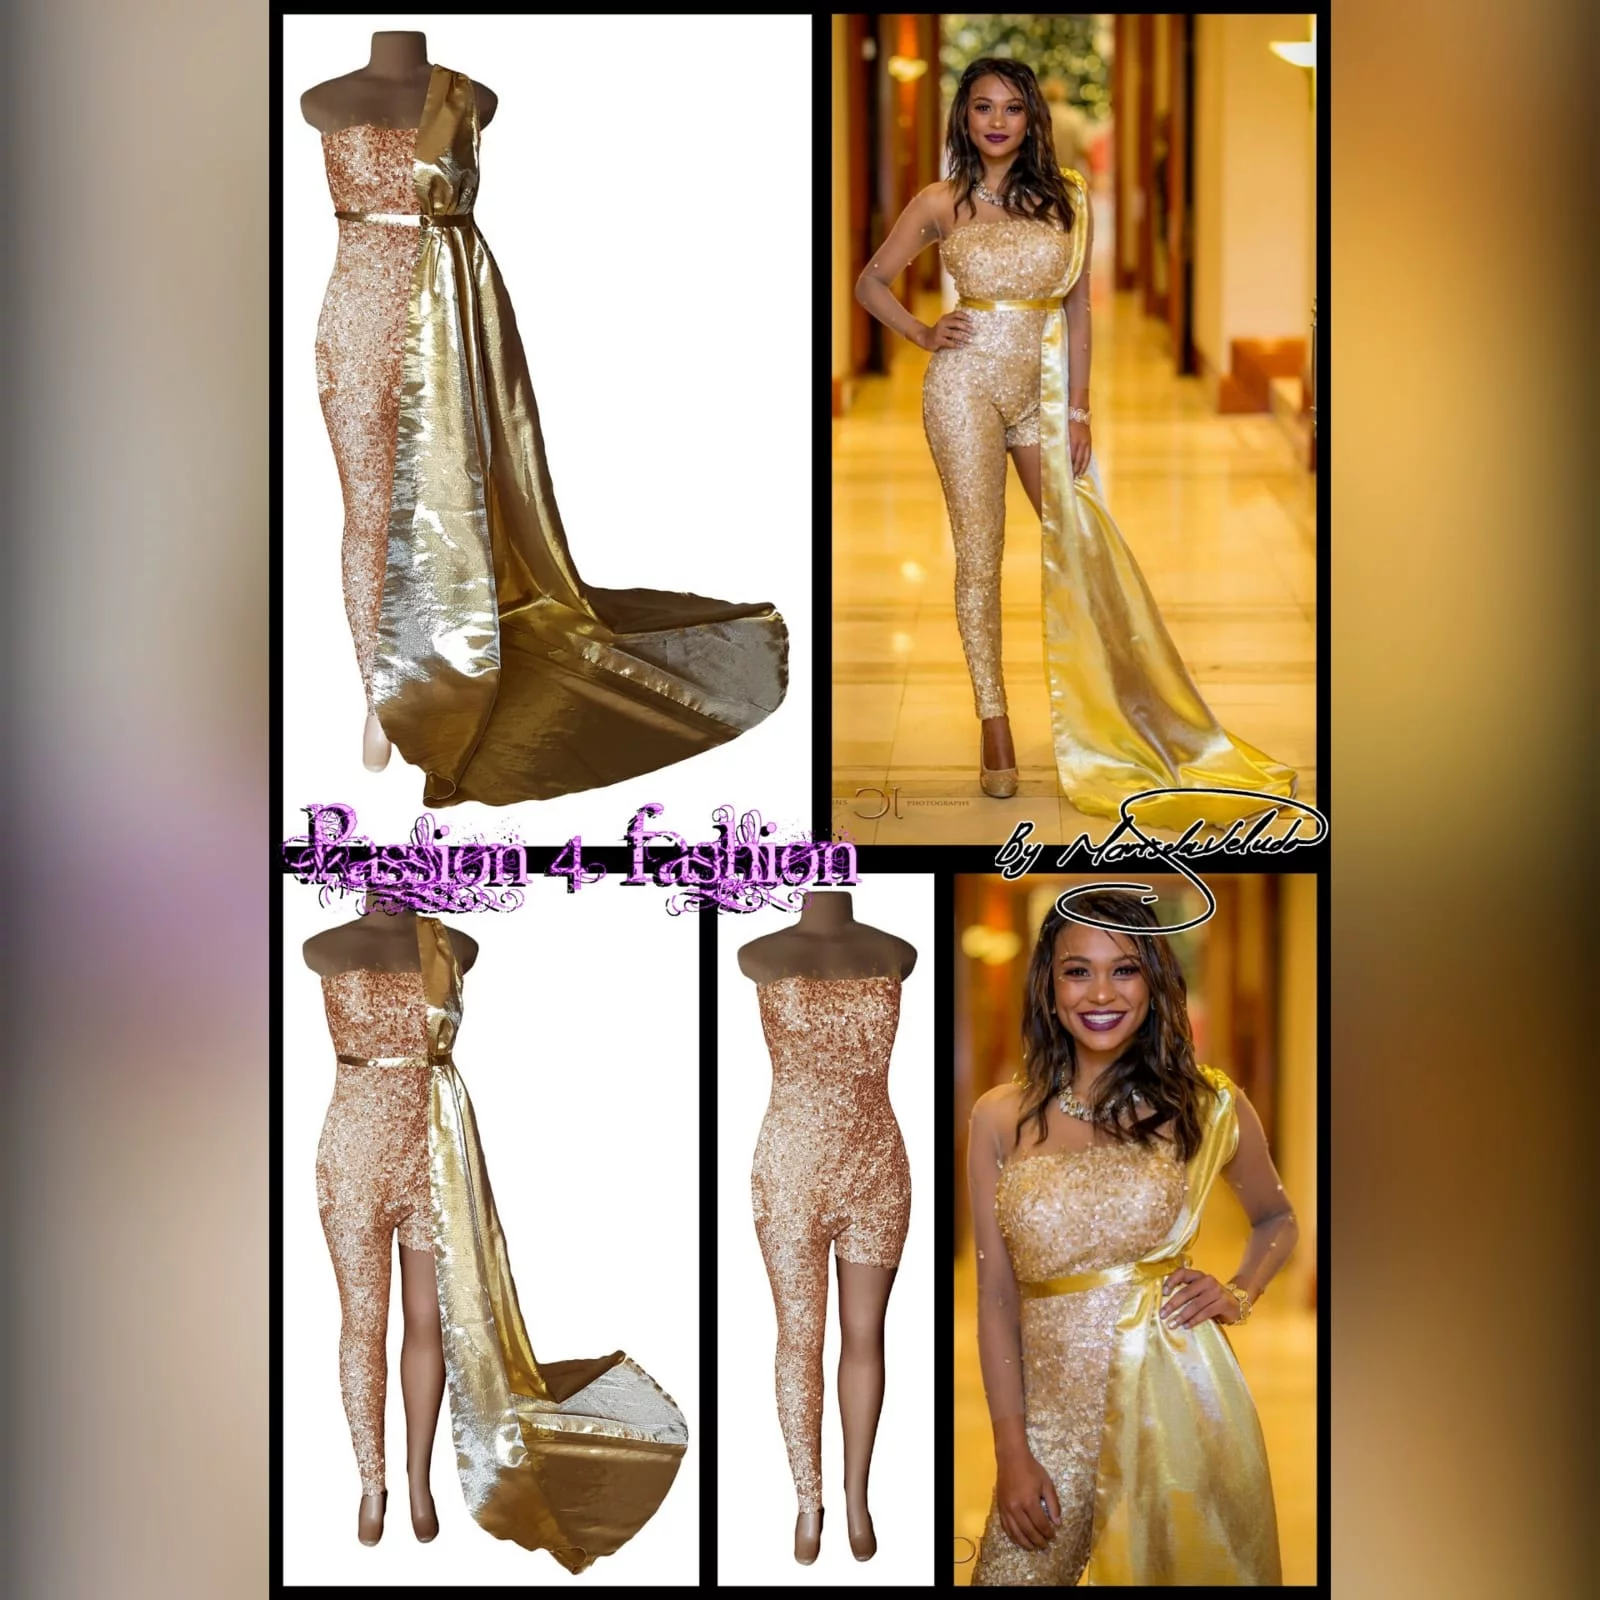 Gold sequins evening wear bodysuit 6 gold sequins evening wear bodysuit with an illusion neckline and sleeves, detailed with gold beads. With a long and short leg. Detachable side gold train.